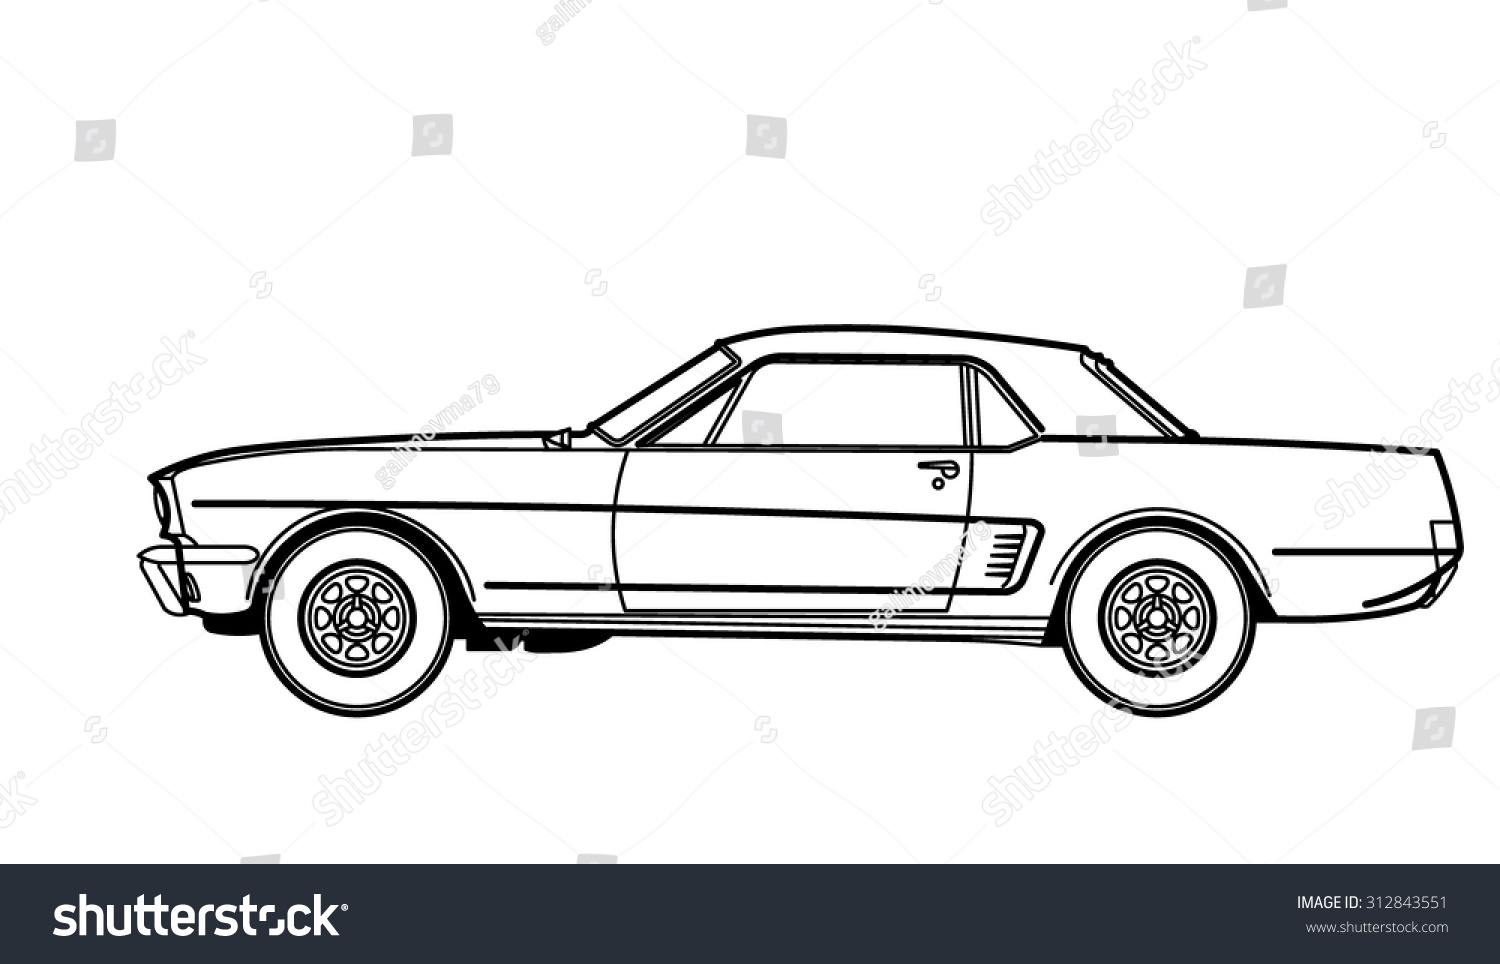 Muscle Car Drawing Stock Vector 312843551 - Shutterstock